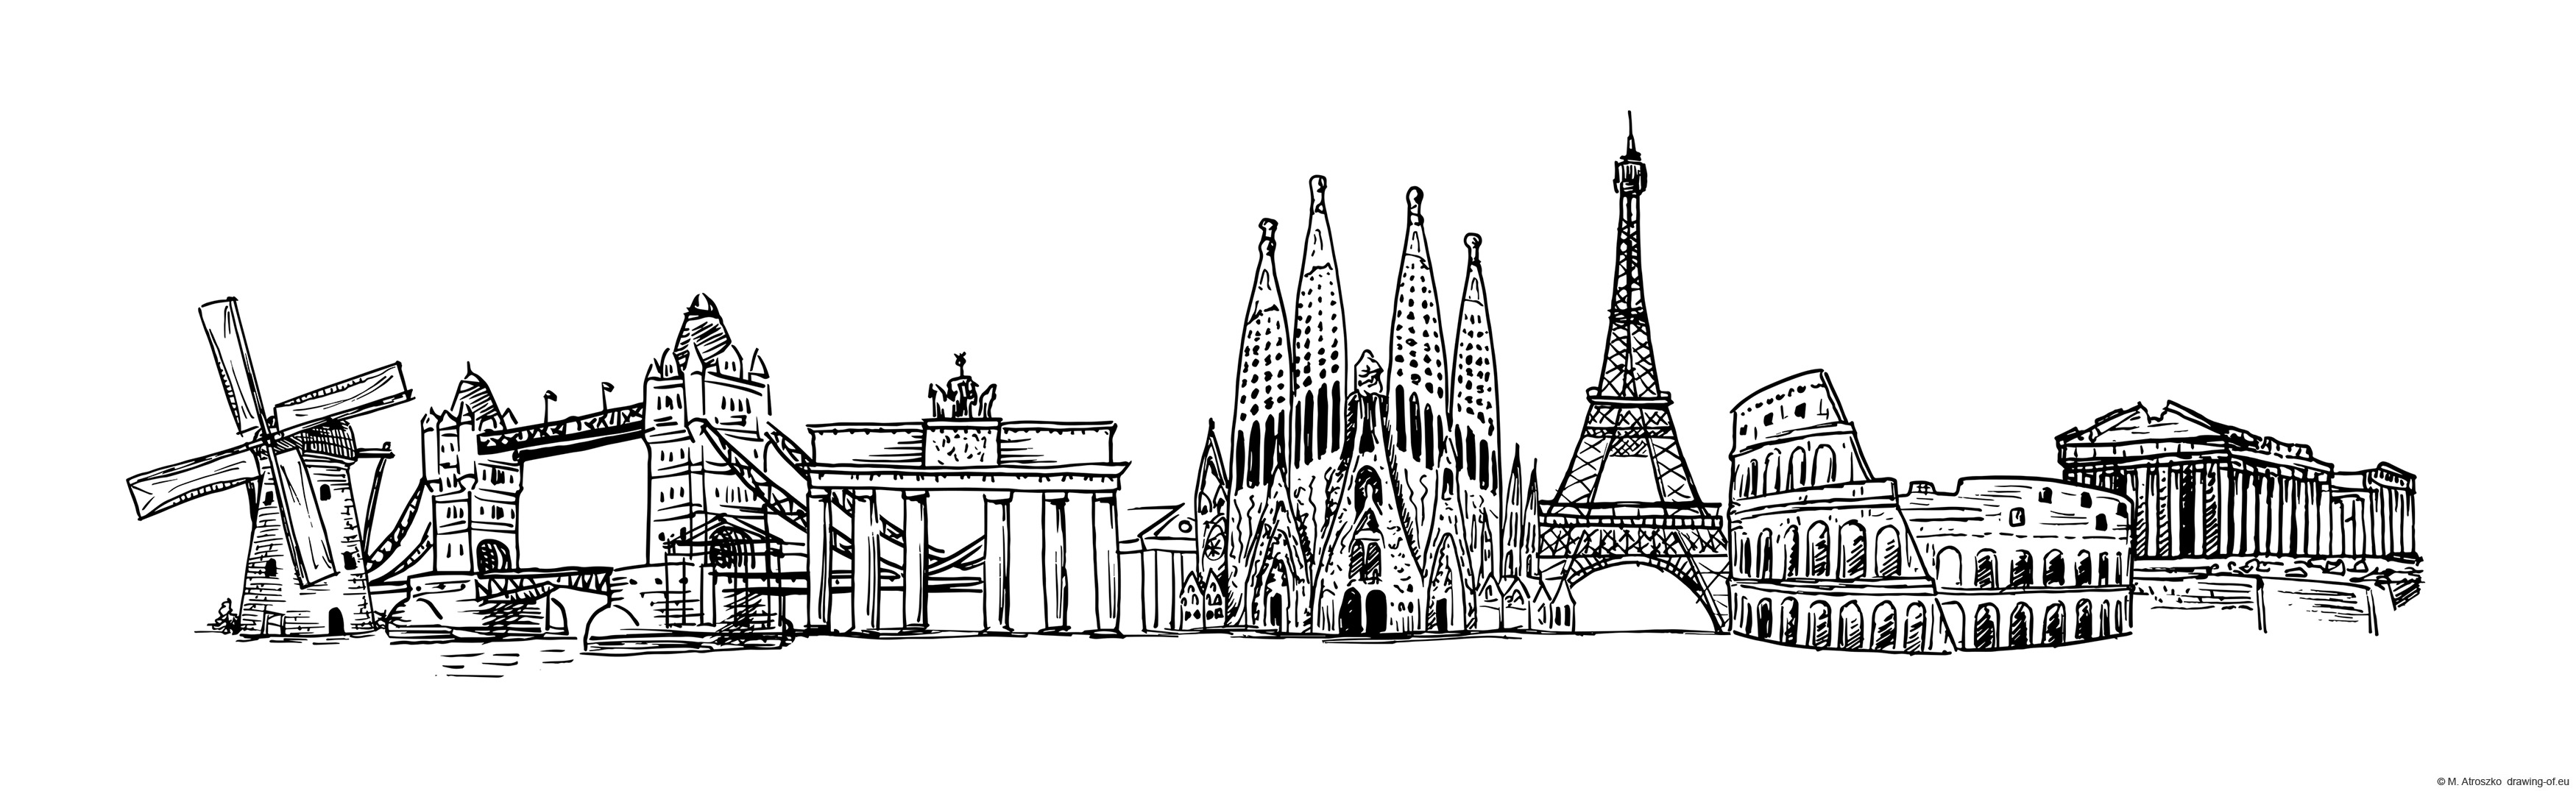 Famous buildings of Europe draw